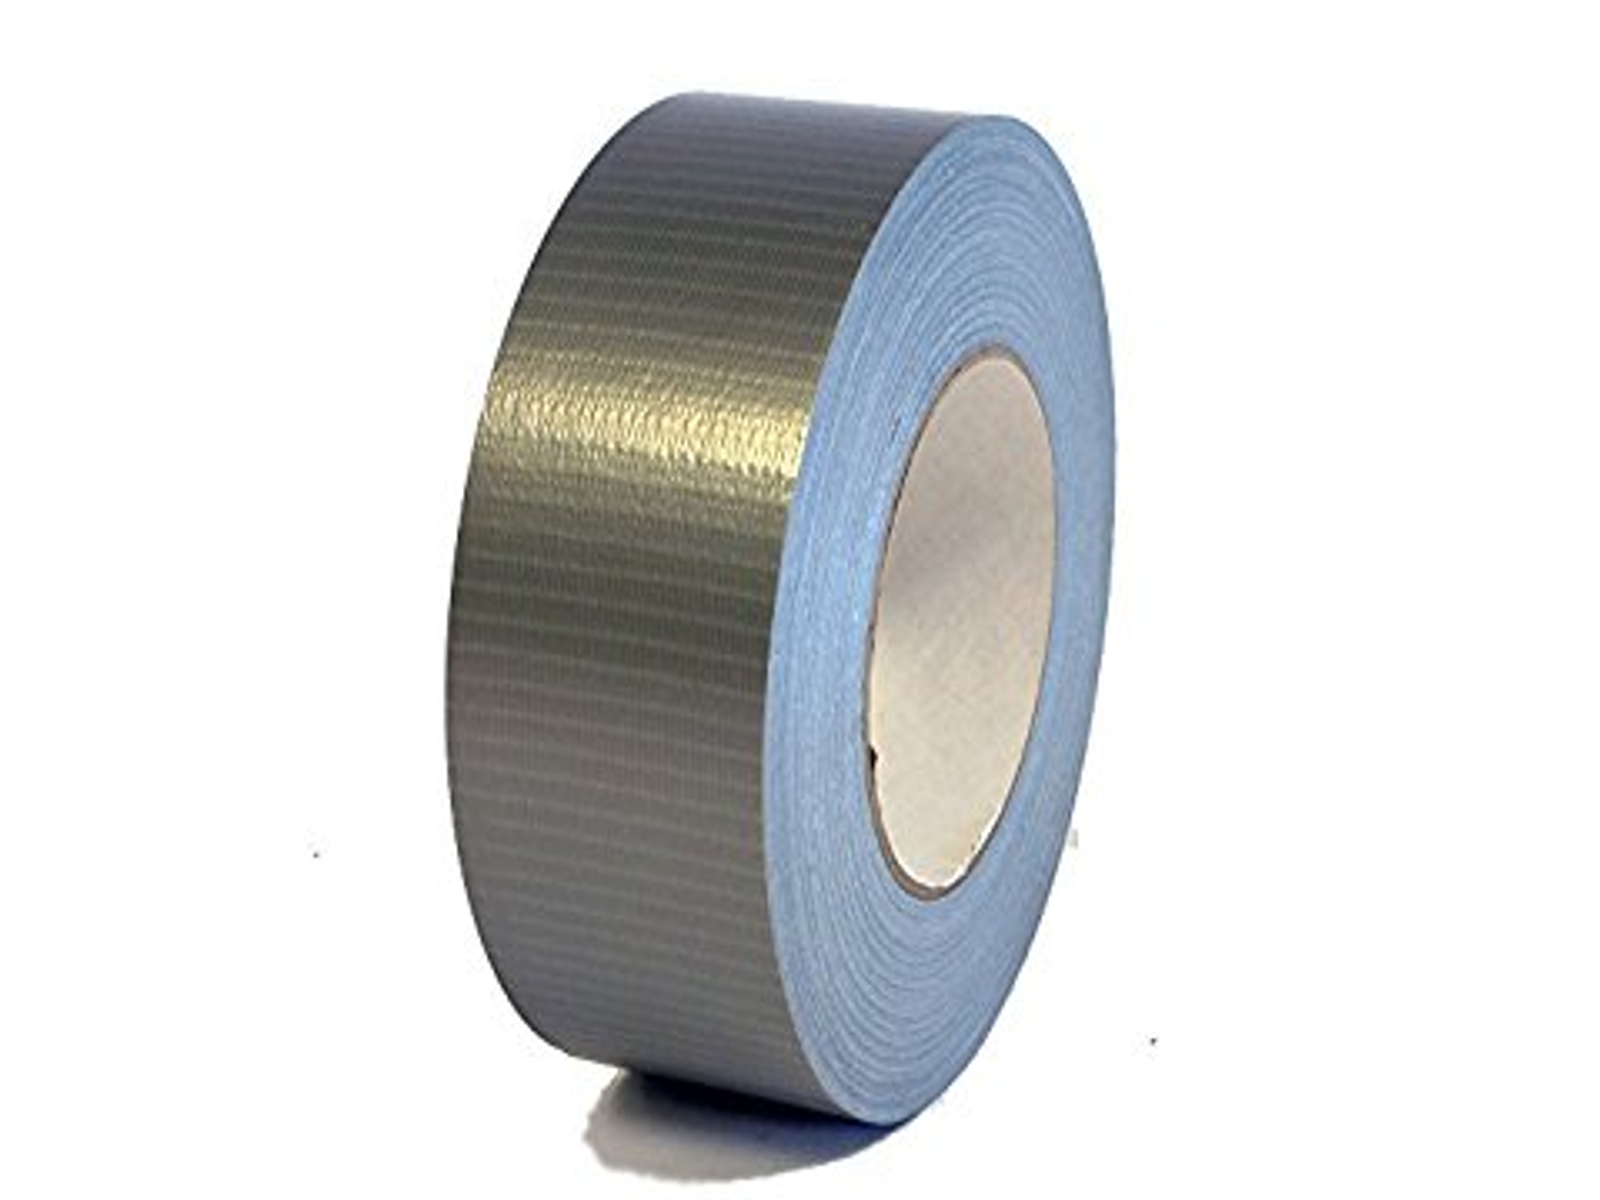 DUCT TAPE POLY-COATED CLOTH BACKING. RUBBER ADHESIVE. 8